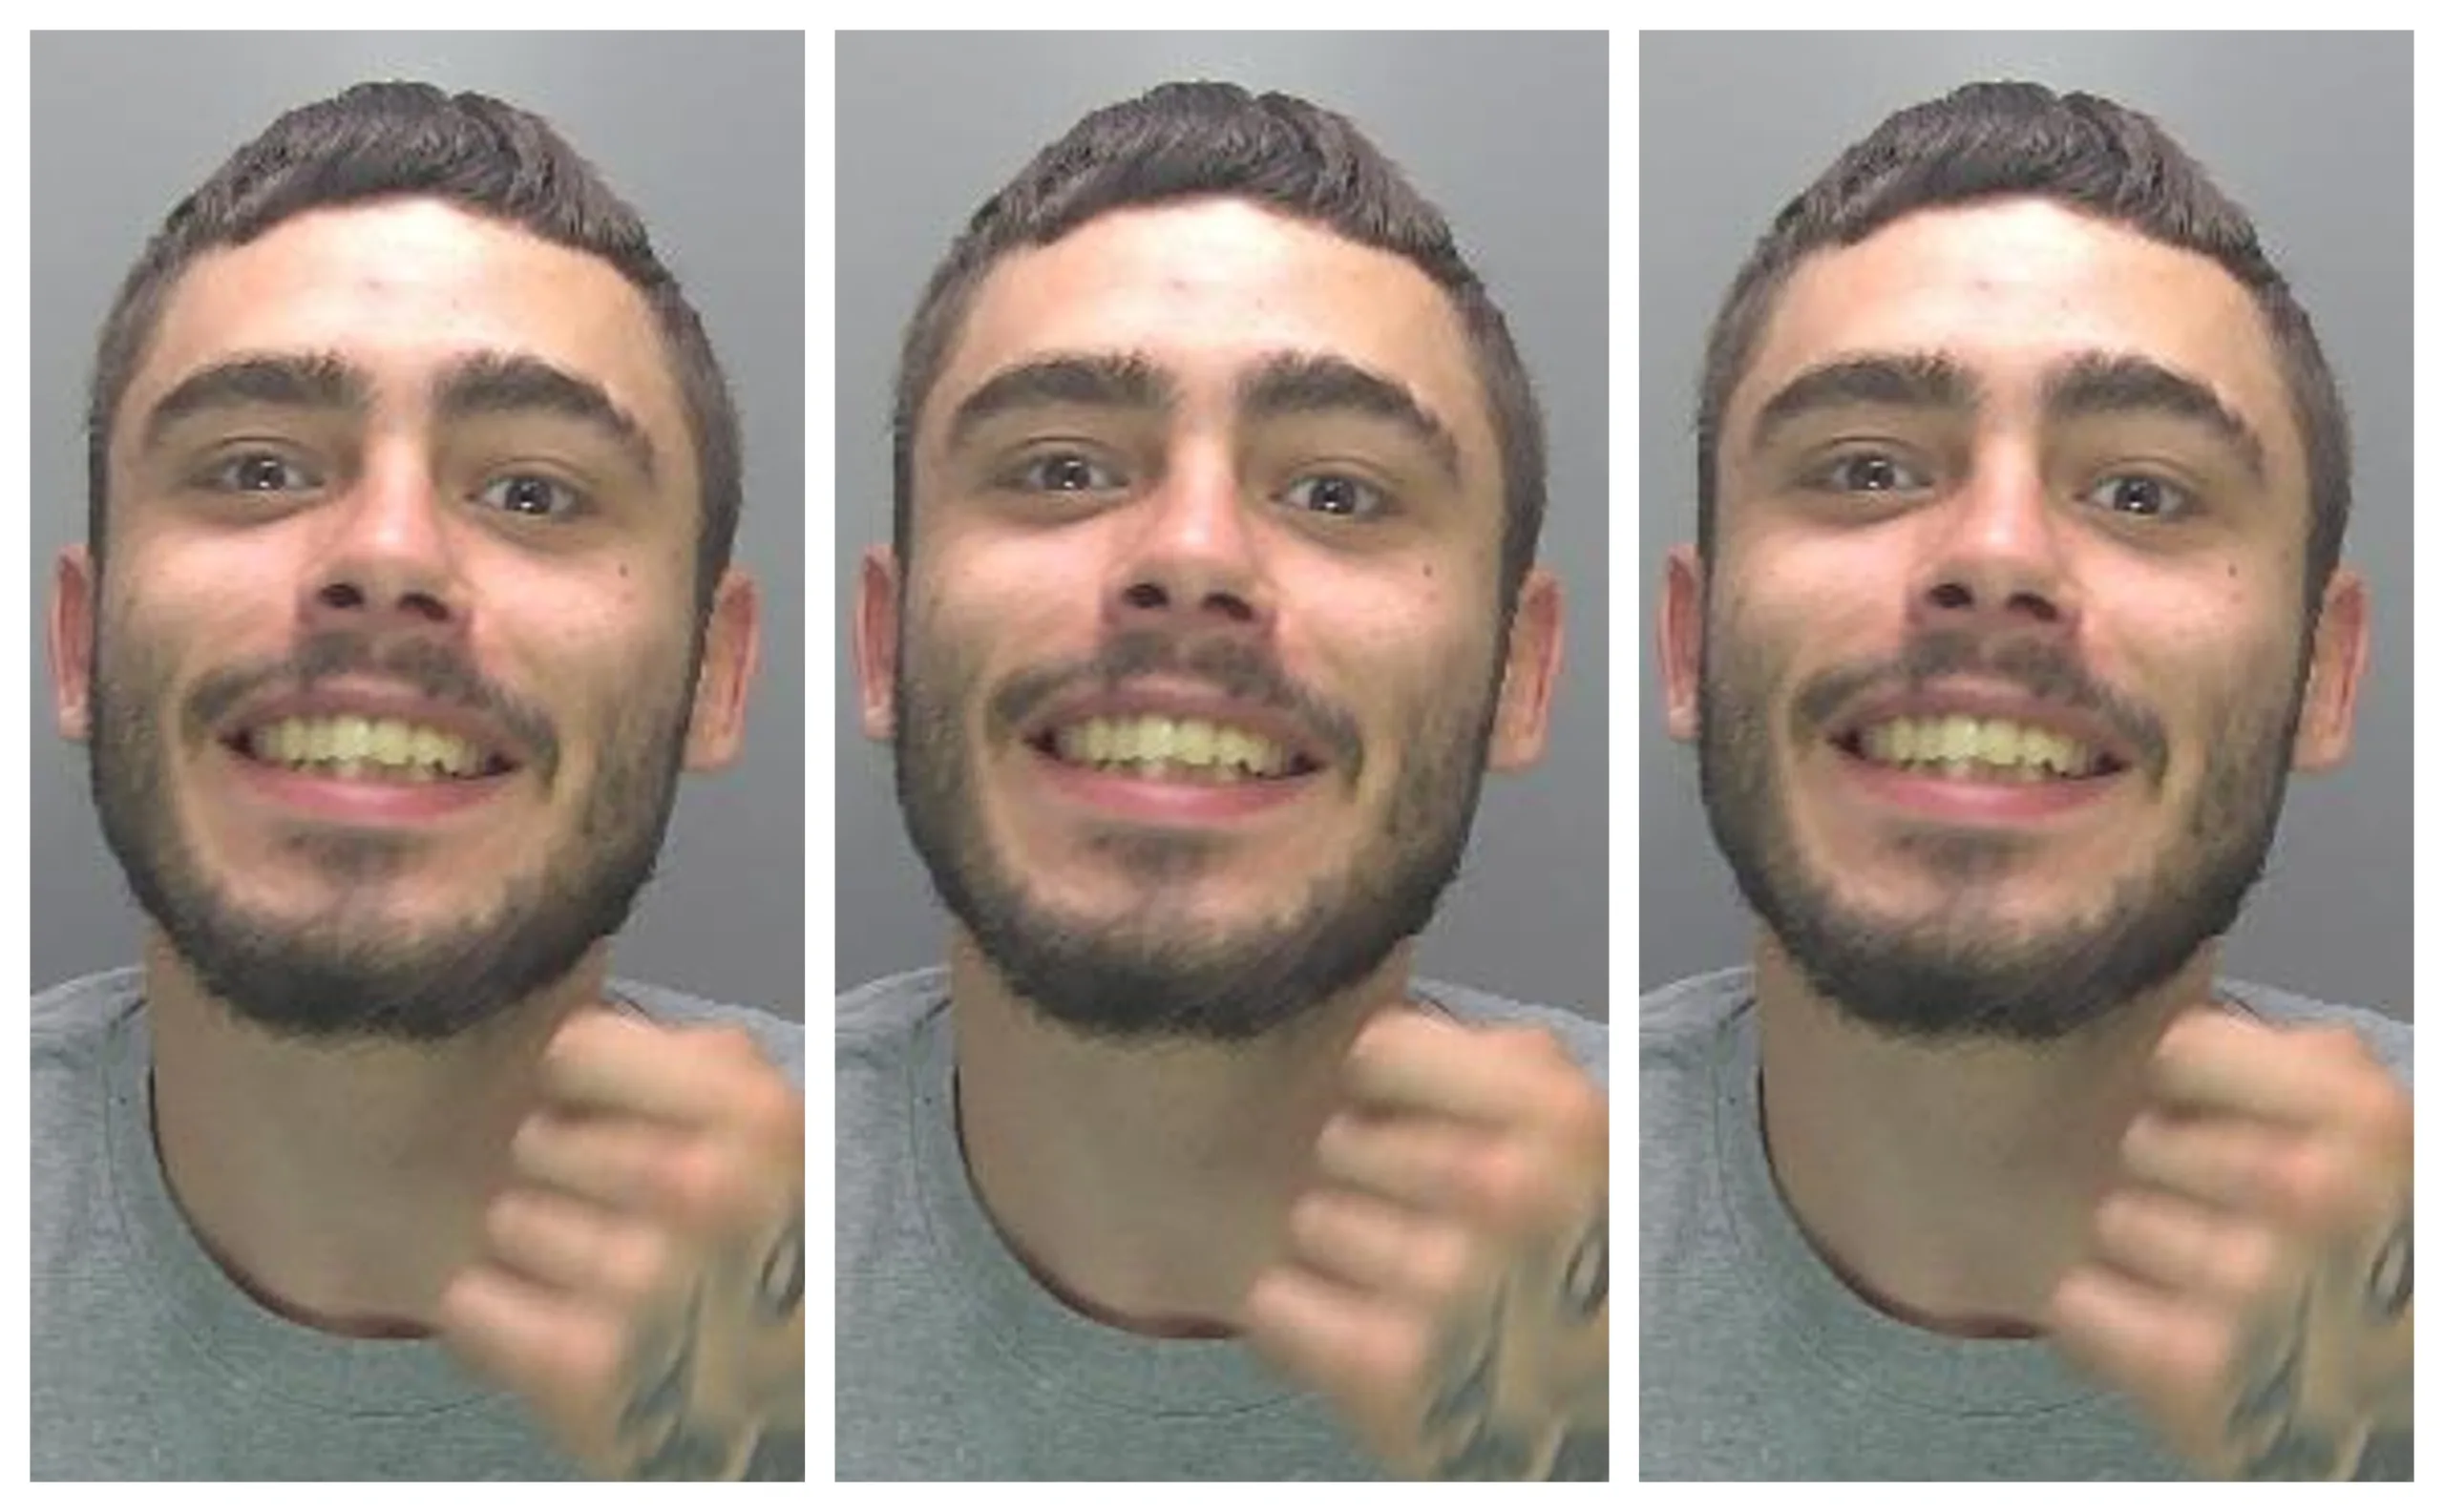 Kieren Latore, 22, appeared at Peterborough Crown Court after admitting causing actual bodily harm (ABH) and drug offences from outside the county